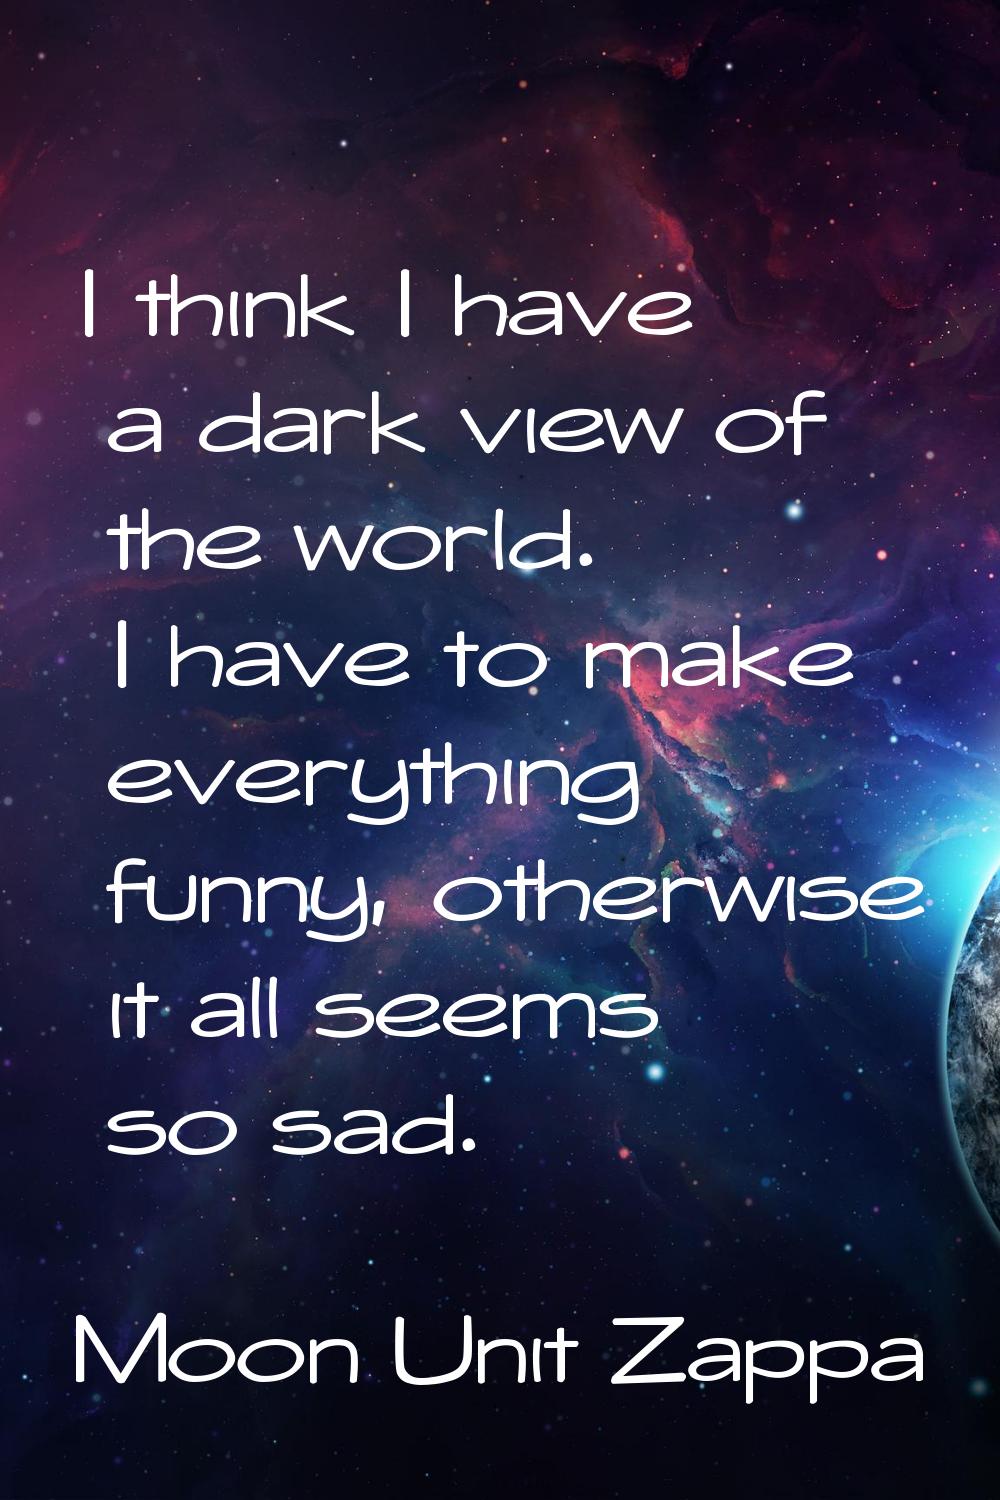 I think I have a dark view of the world. I have to make everything funny, otherwise it all seems so